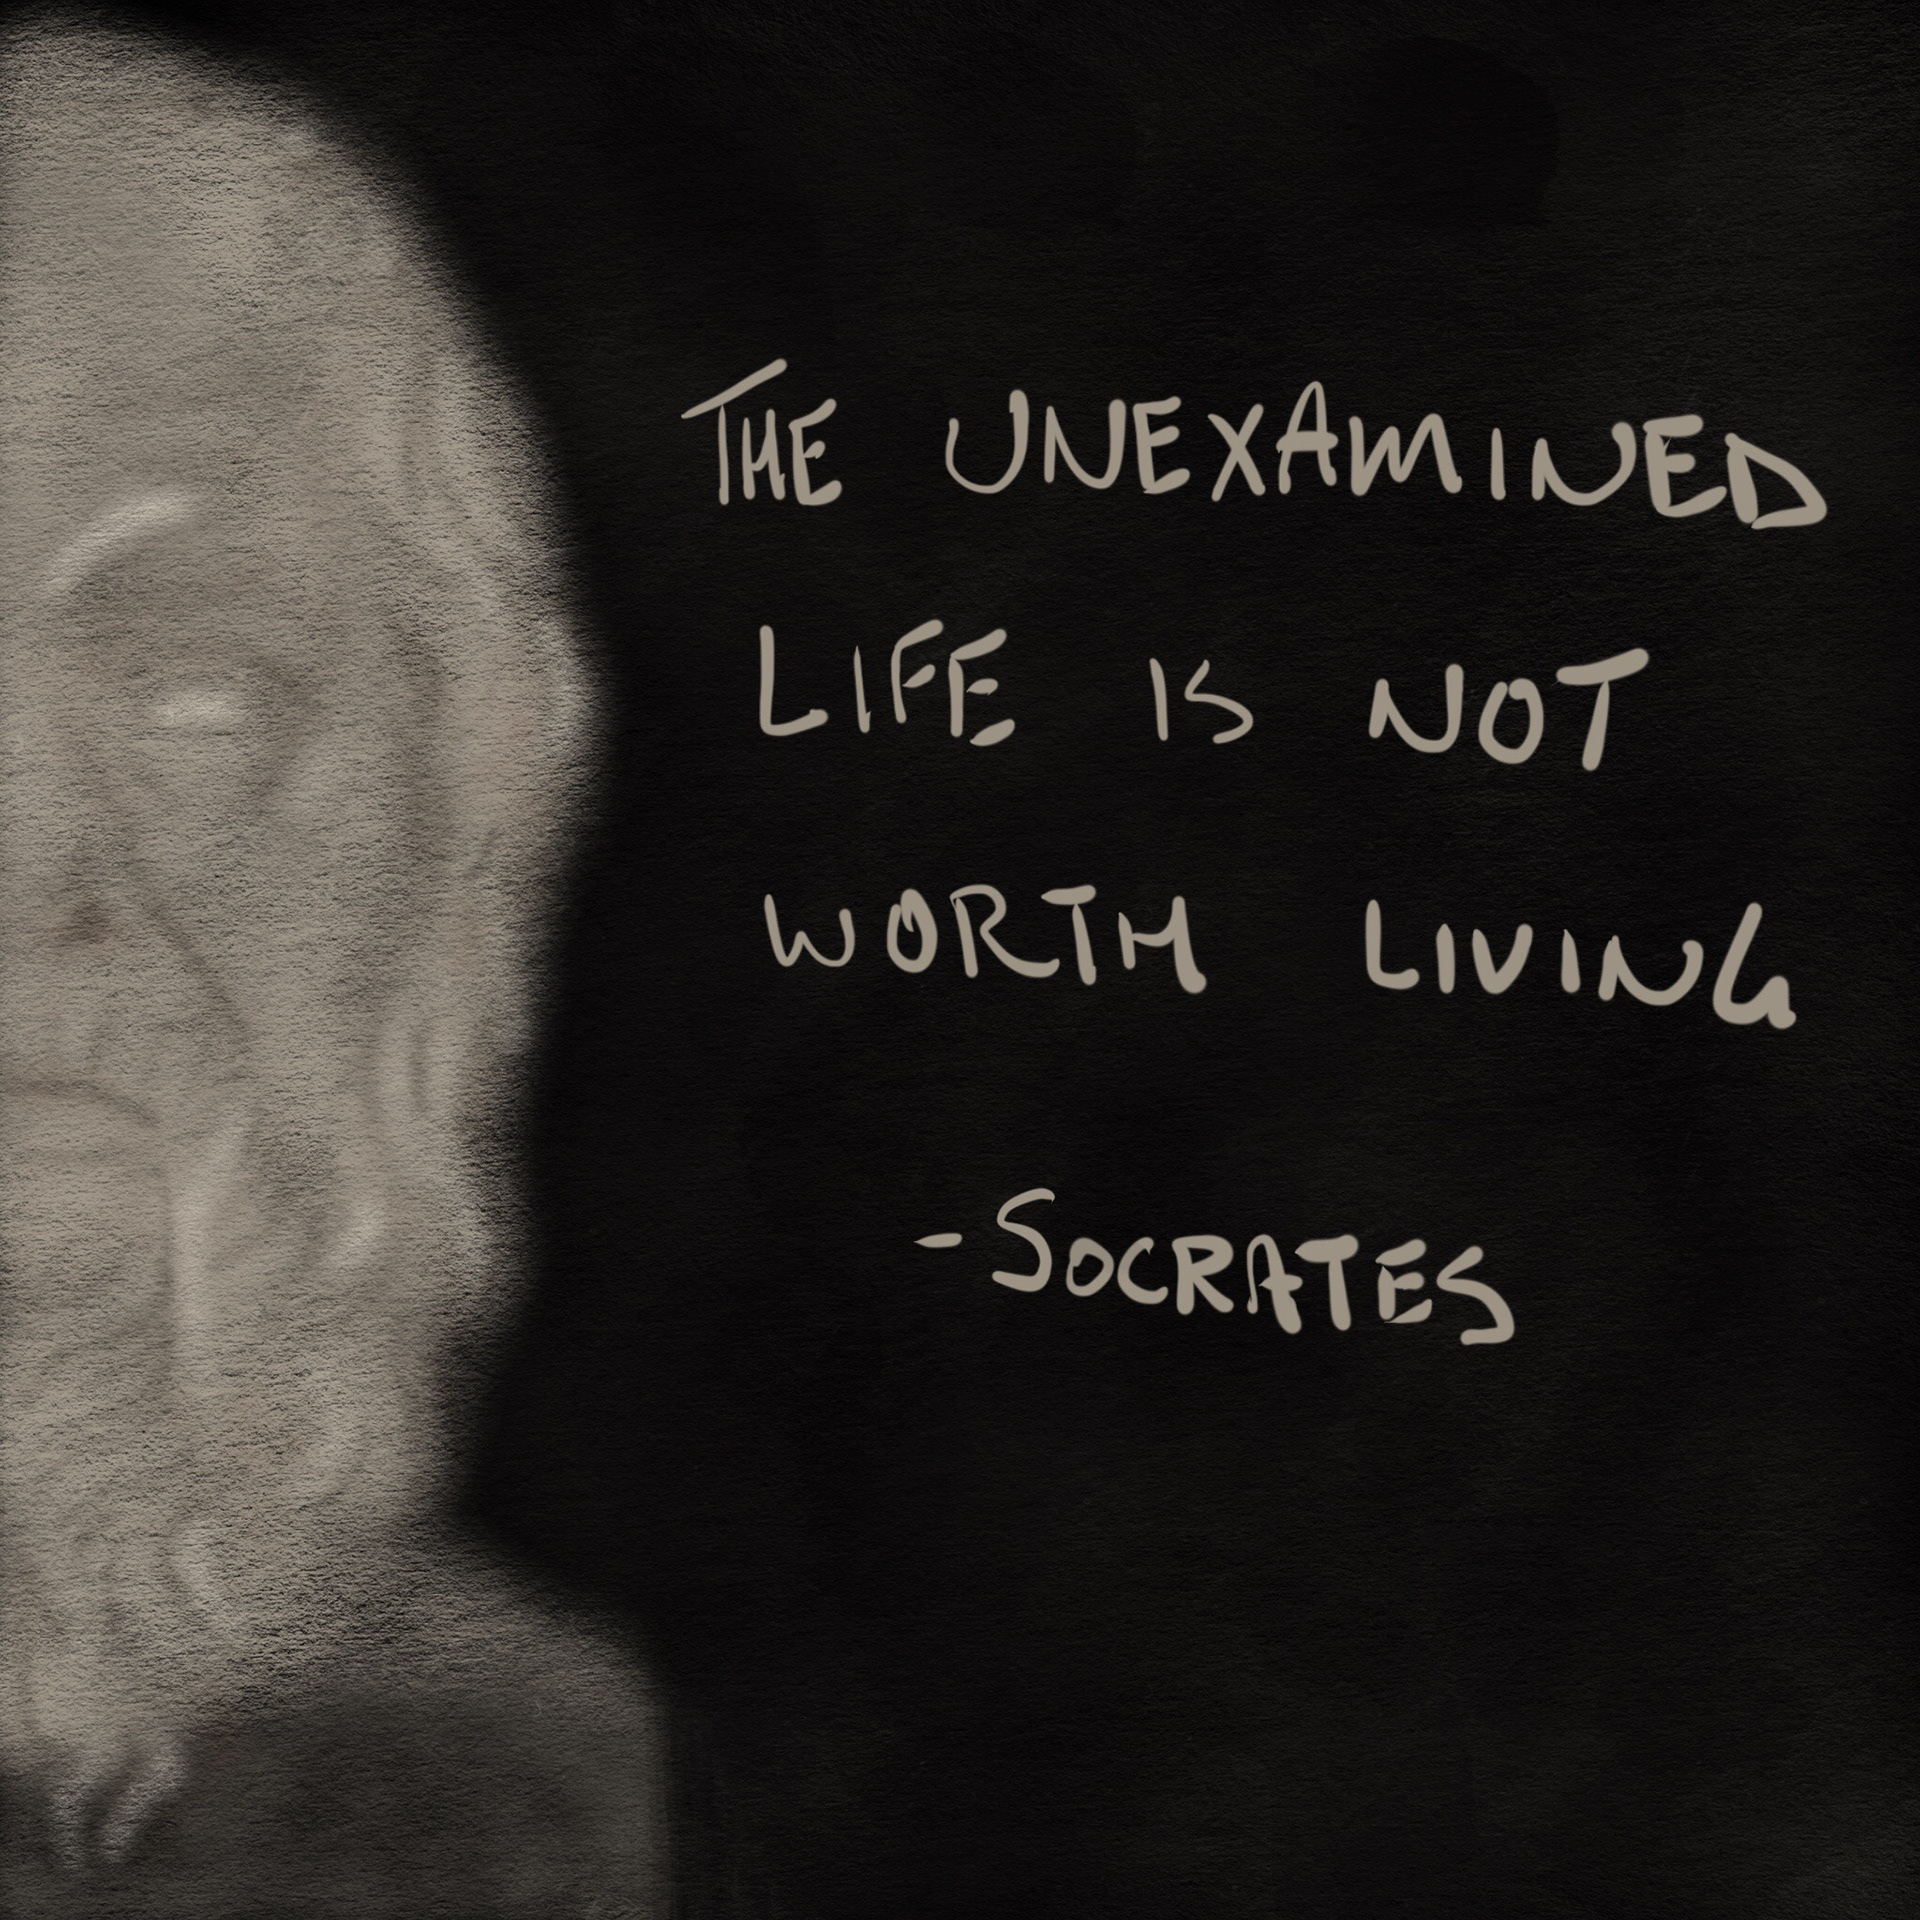 essay on the unexamined life is not worth living